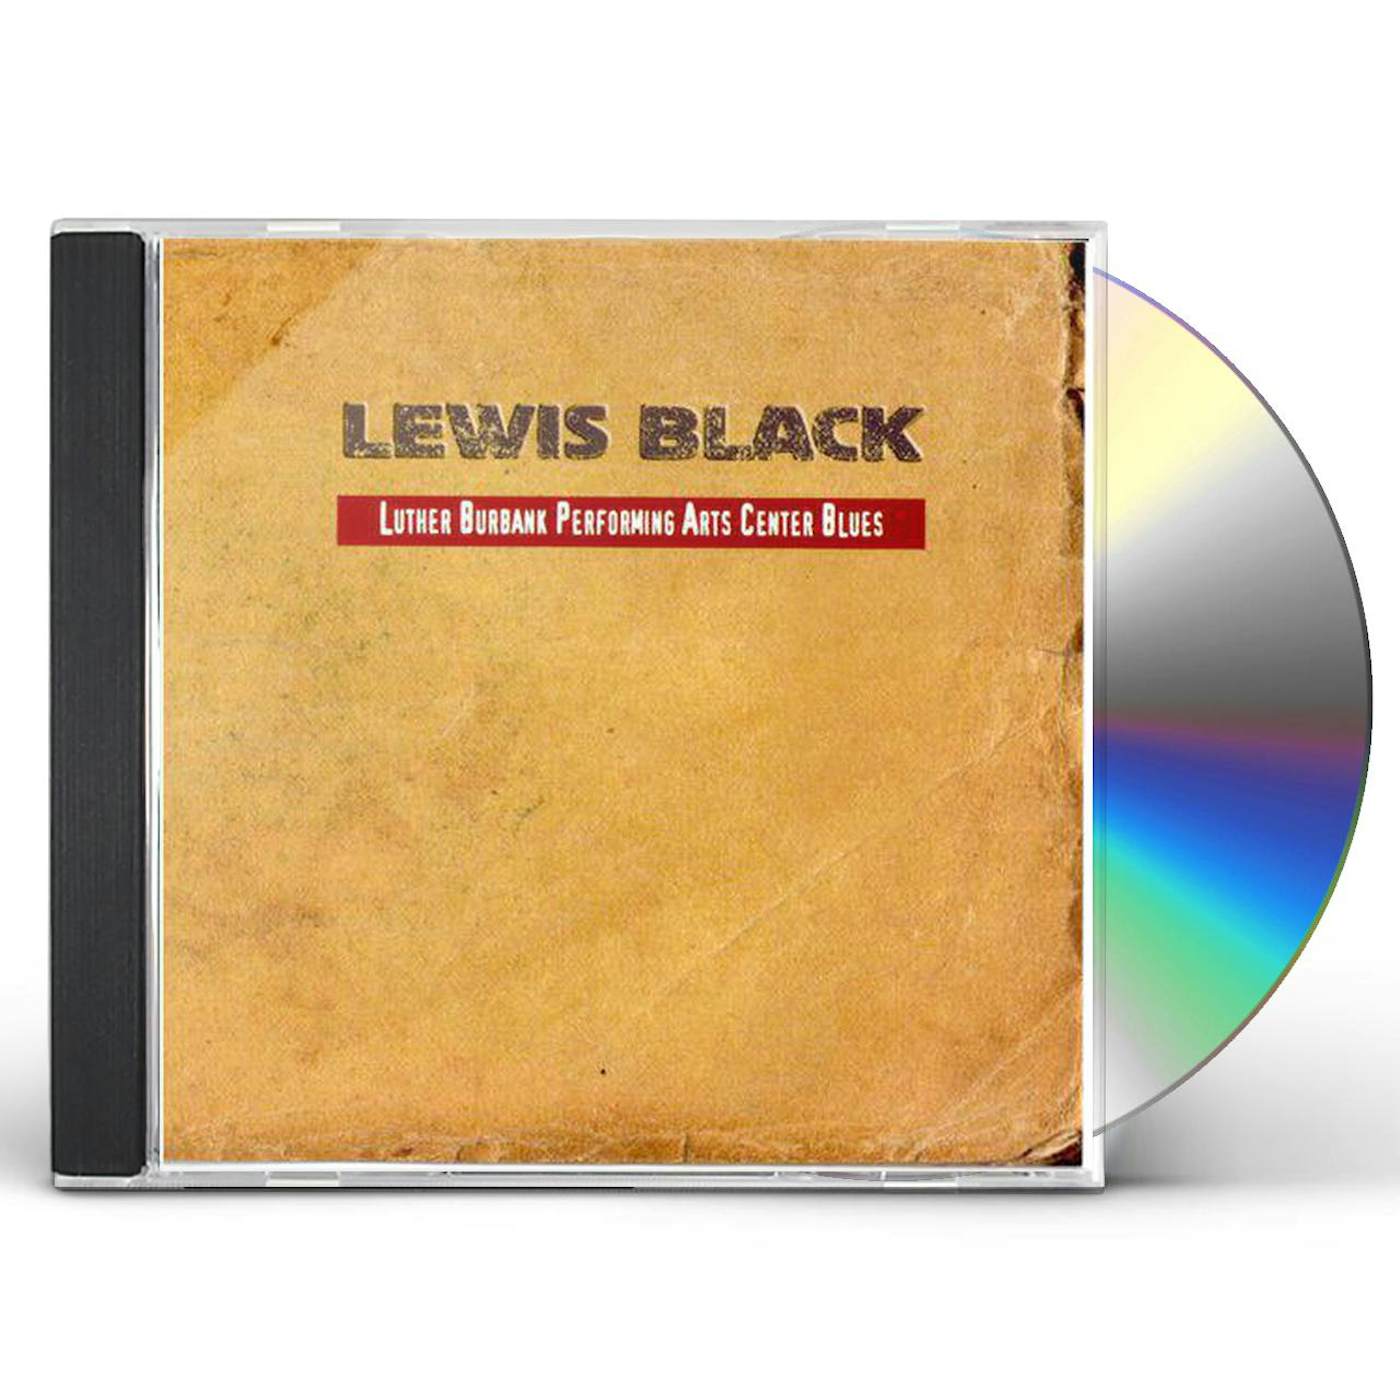 Lewis Black LUTHER BURBANK PERFORMING ARTS CENTER BLUES CD